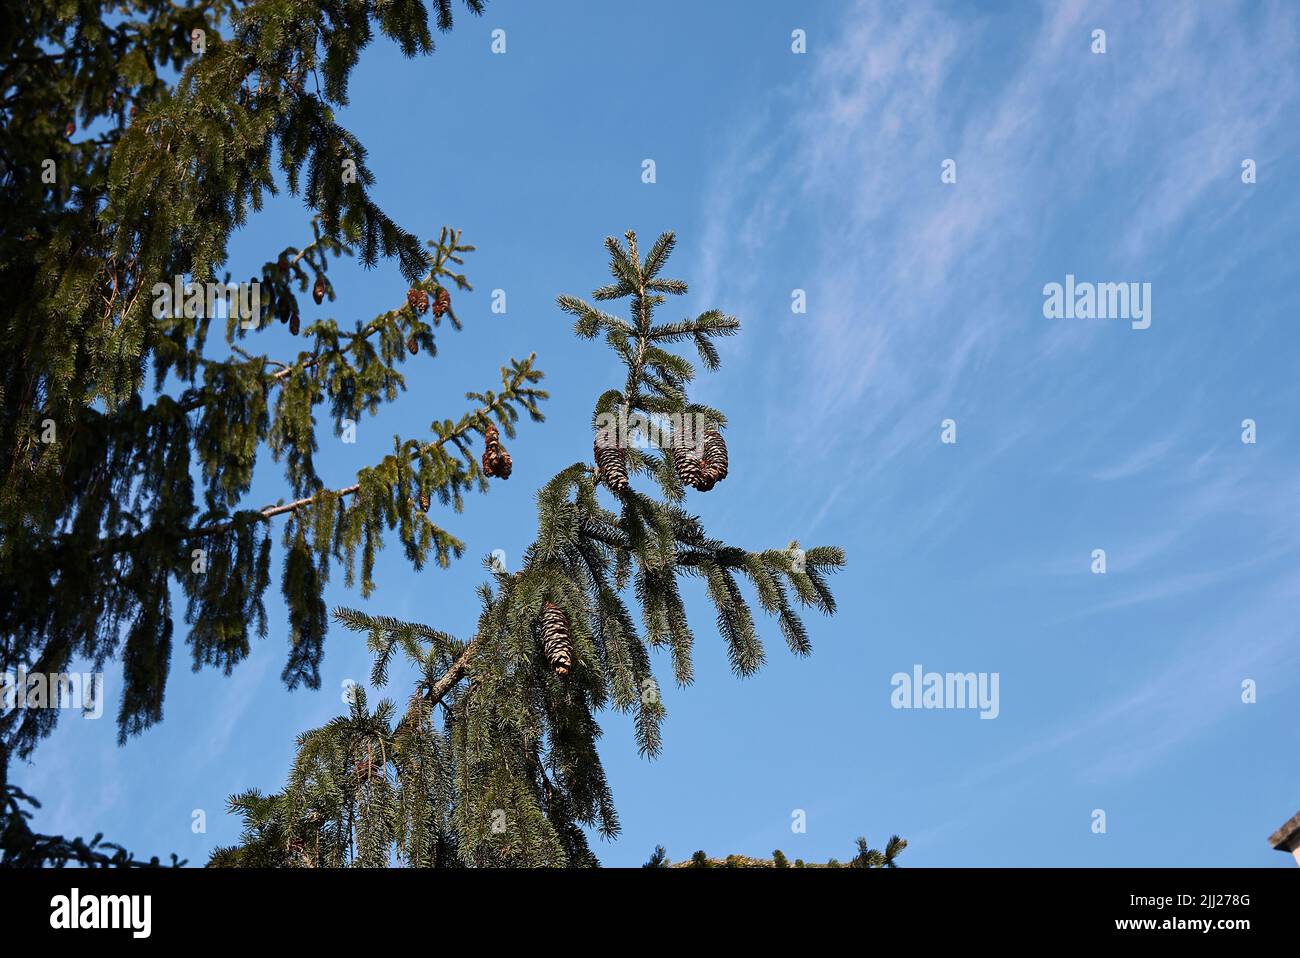 Picea abies branch close up Stock Photo